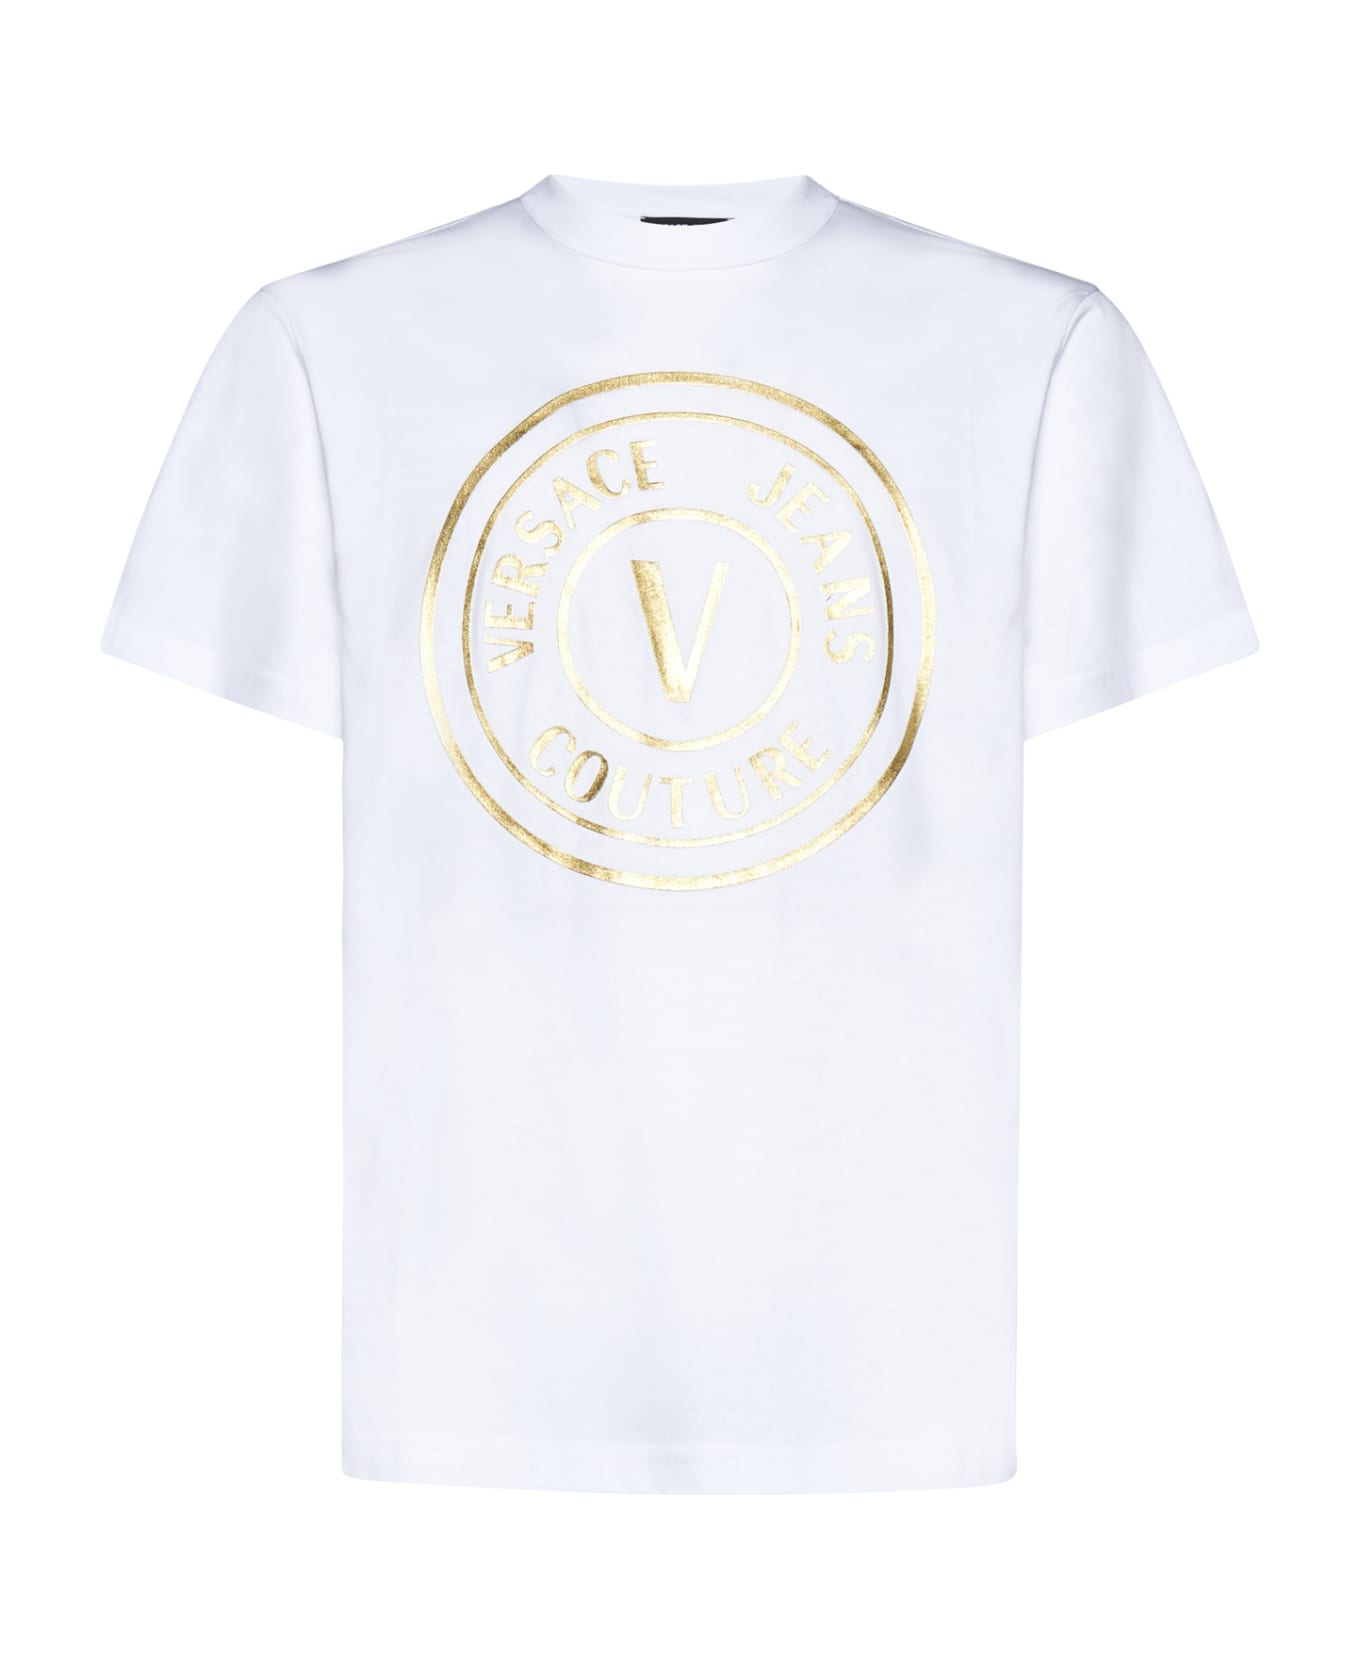 Versace Jeans Couture V Emblem T-shirt - White gold シャツ